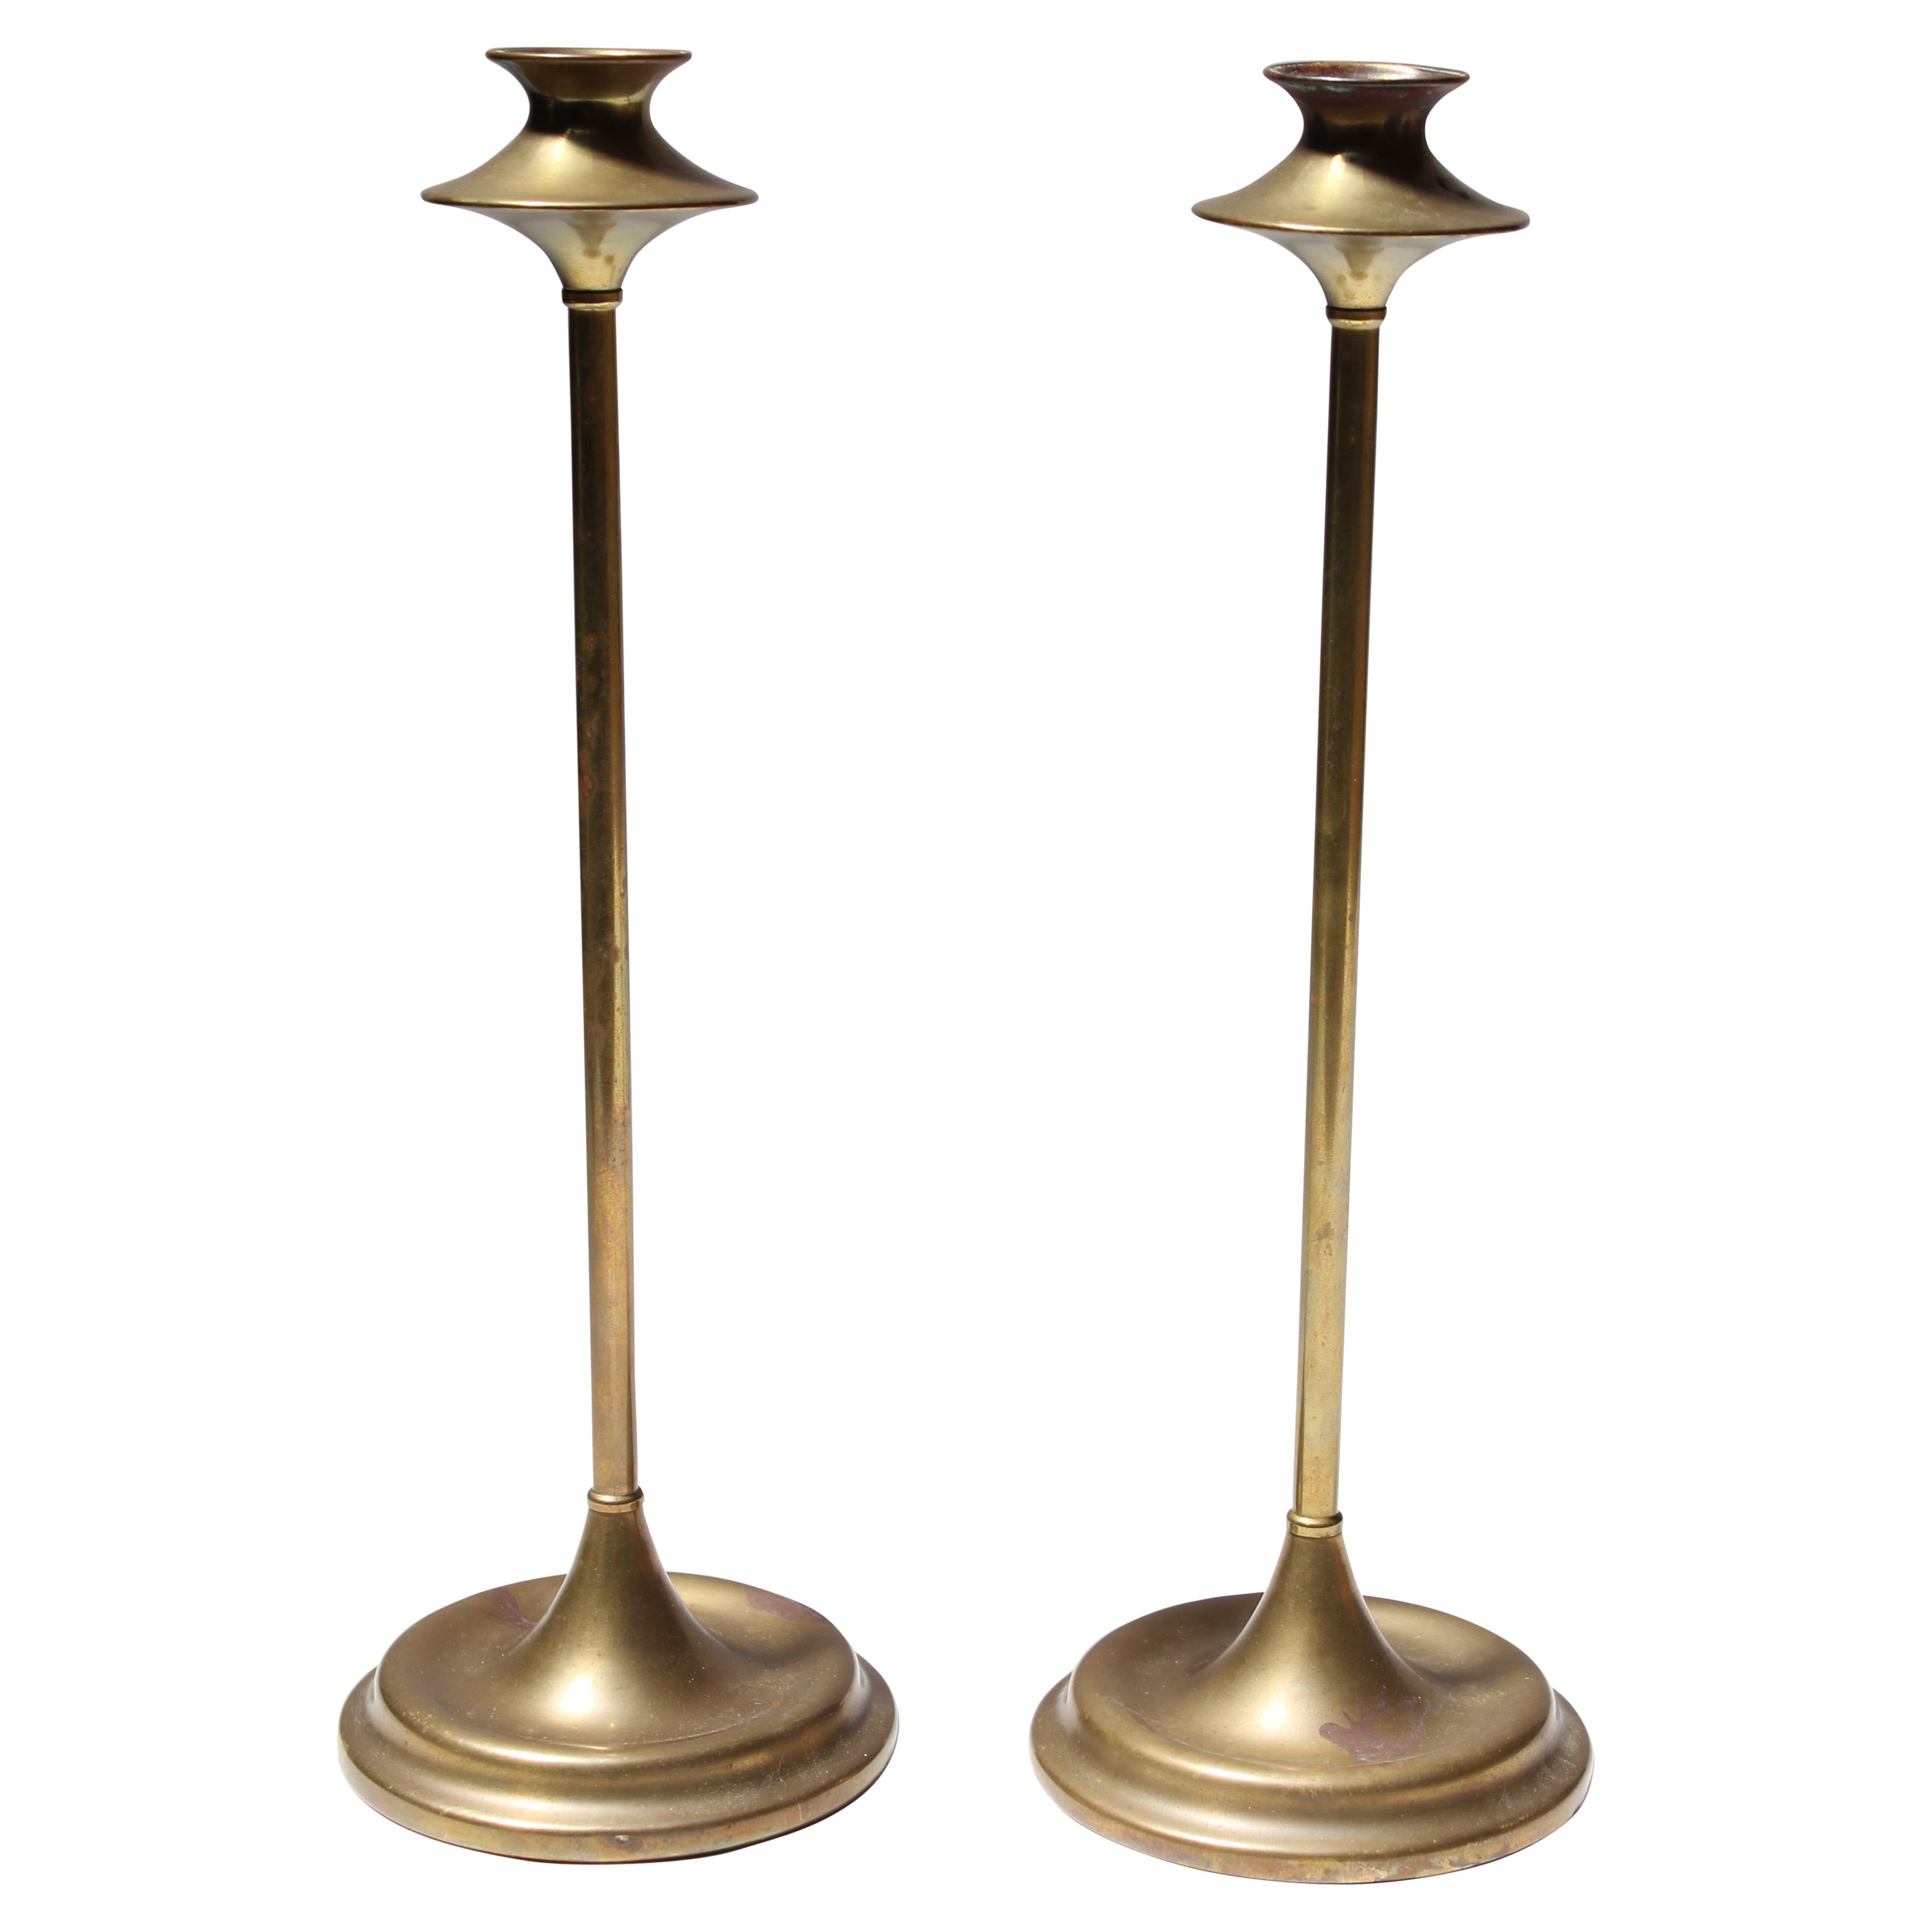 Pair of Art & Crafts Turned Brass Candlesticks after Jarvie